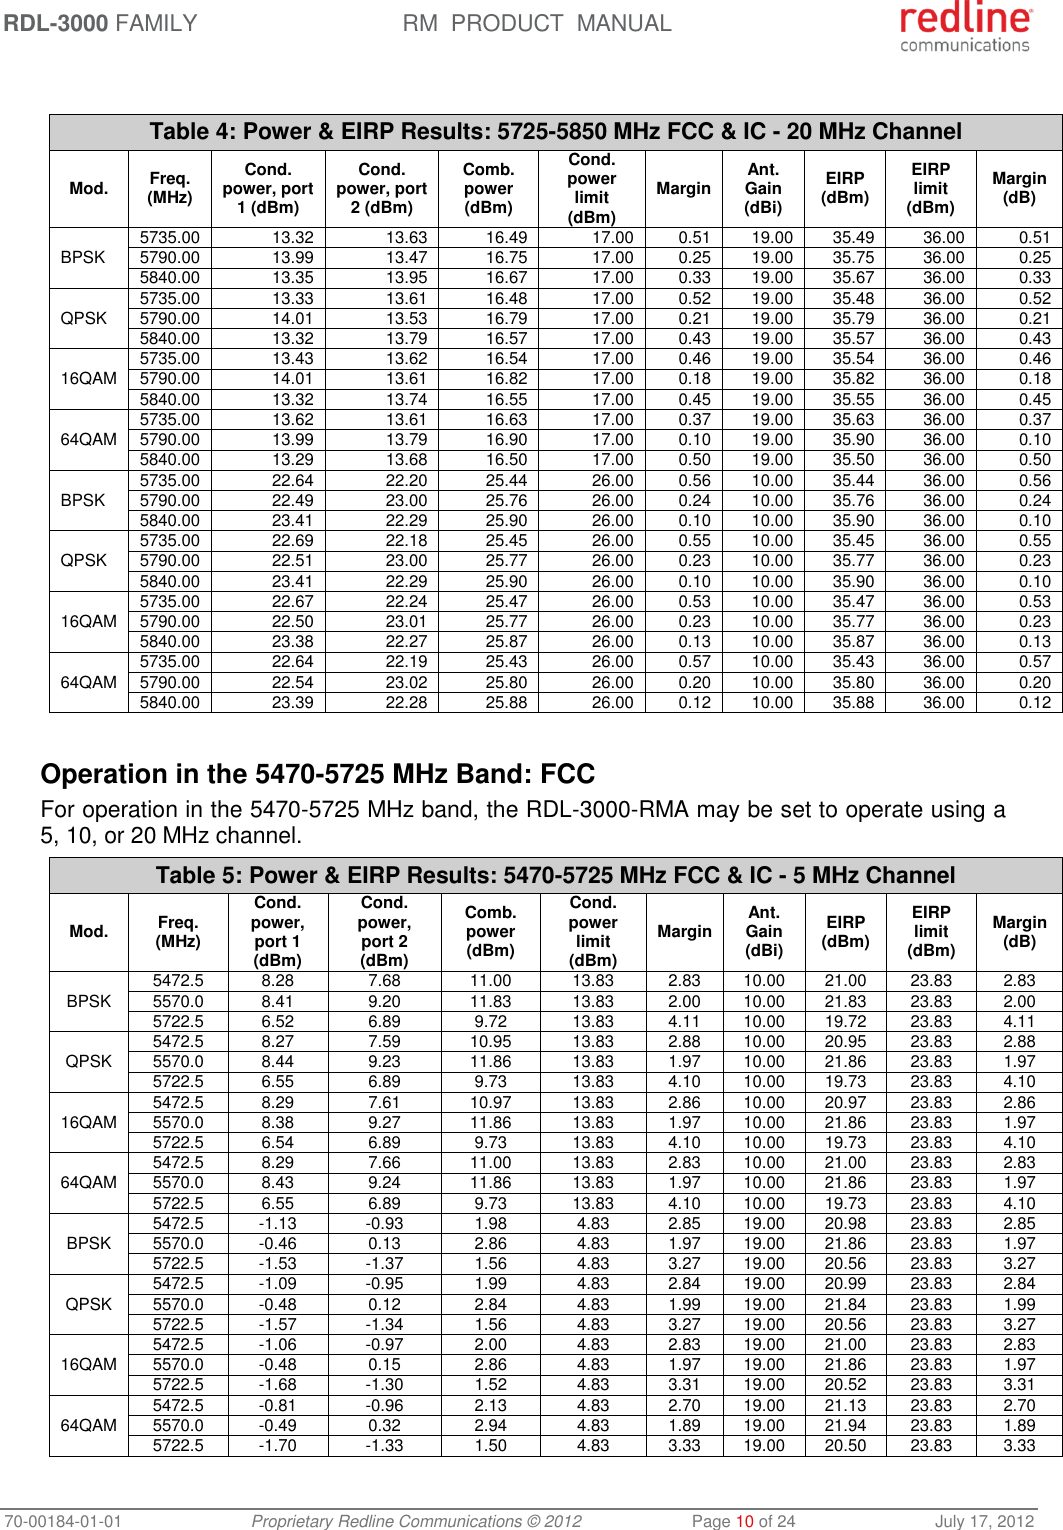 RDL-3000 FAMILY RM  PRODUCT  MANUAL 70-00184-01-01 Proprietary Redline Communications © 2012  Page 10 of 24  July 17, 2012  Table 4: Power &amp; EIRP Results: 5725-5850 MHz FCC &amp; IC - 20 MHz Channel Mod. Freq. (MHz) Cond. power, port 1 (dBm) Cond. power, port 2 (dBm) Comb. power (dBm) Cond. power limit (dBm) Margin Ant. Gain (dBi) EIRP (dBm) EIRP limit (dBm) Margin (dB) BPSK  5735.00 13.32 13.63 16.49 17.00 0.51 19.00 35.49 36.00 0.51 5790.00 13.99 13.47 16.75 17.00 0.25 19.00 35.75 36.00 0.25 5840.00 13.35 13.95 16.67 17.00 0.33 19.00 35.67 36.00 0.33 QPSK 5735.00 13.33 13.61 16.48 17.00 0.52 19.00 35.48 36.00 0.52 5790.00 14.01 13.53 16.79 17.00 0.21 19.00 35.79 36.00 0.21 5840.00 13.32 13.79 16.57 17.00 0.43 19.00 35.57 36.00 0.43 16QAM 5735.00 13.43 13.62 16.54 17.00 0.46 19.00 35.54 36.00 0.46 5790.00 14.01 13.61 16.82 17.00 0.18 19.00 35.82 36.00 0.18 5840.00 13.32 13.74 16.55 17.00 0.45 19.00 35.55 36.00 0.45 64QAM 5735.00 13.62 13.61 16.63 17.00 0.37 19.00 35.63 36.00 0.37 5790.00 13.99 13.79 16.90 17.00 0.10 19.00 35.90 36.00 0.10 5840.00 13.29 13.68 16.50 17.00 0.50 19.00 35.50 36.00 0.50 BPSK  5735.00 22.64 22.20 25.44 26.00 0.56 10.00 35.44 36.00 0.56 5790.00 22.49 23.00 25.76 26.00 0.24 10.00 35.76 36.00 0.24 5840.00 23.41 22.29 25.90 26.00 0.10 10.00 35.90 36.00 0.10 QPSK  5735.00 22.69 22.18 25.45 26.00 0.55 10.00 35.45 36.00 0.55 5790.00 22.51 23.00 25.77 26.00 0.23 10.00 35.77 36.00 0.23 5840.00 23.41 22.29 25.90 26.00 0.10 10.00 35.90 36.00 0.10 16QAM  5735.00 22.67 22.24 25.47 26.00 0.53 10.00 35.47 36.00 0.53 5790.00 22.50 23.01 25.77 26.00 0.23 10.00 35.77 36.00 0.23 5840.00 23.38 22.27 25.87 26.00 0.13 10.00 35.87 36.00 0.13 64QAM  5735.00 22.64 22.19 25.43 26.00 0.57 10.00 35.43 36.00 0.57 5790.00 22.54 23.02 25.80 26.00 0.20 10.00 35.80 36.00 0.20 5840.00 23.39 22.28 25.88 26.00 0.12 10.00 35.88 36.00 0.12   Operation in the 5470-5725 MHz Band: FCC For operation in the 5470-5725 MHz band, the RDL-3000-RMA may be set to operate using a 5, 10, or 20 MHz channel. Table 5: Power &amp; EIRP Results: 5470-5725 MHz FCC &amp; IC - 5 MHz Channel Mod. Freq. (MHz) Cond. power, port 1 (dBm) Cond. power, port 2 (dBm) Comb. power (dBm) Cond. power limit (dBm) Margin Ant. Gain (dBi) EIRP (dBm) EIRP limit (dBm) Margin (dB) BPSK 5472.5 8.28 7.68 11.00 13.83 2.83 10.00 21.00 23.83 2.83 5570.0 8.41 9.20 11.83 13.83 2.00 10.00 21.83 23.83 2.00 5722.5 6.52 6.89 9.72 13.83 4.11 10.00 19.72 23.83 4.11 QPSK 5472.5 8.27 7.59 10.95 13.83 2.88 10.00 20.95 23.83 2.88 5570.0 8.44 9.23 11.86 13.83 1.97 10.00 21.86 23.83 1.97 5722.5 6.55 6.89 9.73 13.83 4.10 10.00 19.73 23.83 4.10 16QAM 5472.5 8.29 7.61 10.97 13.83 2.86 10.00 20.97 23.83 2.86 5570.0 8.38 9.27 11.86 13.83 1.97 10.00 21.86 23.83 1.97 5722.5 6.54 6.89 9.73 13.83 4.10 10.00 19.73 23.83 4.10 64QAM 5472.5 8.29 7.66 11.00 13.83 2.83 10.00 21.00 23.83 2.83 5570.0 8.43 9.24 11.86 13.83 1.97 10.00 21.86 23.83 1.97 5722.5 6.55 6.89 9.73 13.83 4.10 10.00 19.73 23.83 4.10 BPSK 5472.5 -1.13 -0.93 1.98 4.83 2.85 19.00 20.98 23.83 2.85 5570.0 -0.46 0.13 2.86 4.83 1.97 19.00 21.86 23.83 1.97 5722.5 -1.53 -1.37 1.56 4.83 3.27 19.00 20.56 23.83 3.27 QPSK 5472.5 -1.09 -0.95 1.99 4.83 2.84 19.00 20.99 23.83 2.84 5570.0 -0.48 0.12 2.84 4.83 1.99 19.00 21.84 23.83 1.99 5722.5 -1.57 -1.34 1.56 4.83 3.27 19.00 20.56 23.83 3.27 16QAM 5472.5 -1.06 -0.97 2.00 4.83 2.83 19.00 21.00 23.83 2.83 5570.0 -0.48 0.15 2.86 4.83 1.97 19.00 21.86 23.83 1.97 5722.5 -1.68 -1.30 1.52 4.83 3.31 19.00 20.52 23.83 3.31 64QAM 5472.5 -0.81 -0.96 2.13 4.83 2.70 19.00 21.13 23.83 2.70 5570.0 -0.49 0.32 2.94 4.83 1.89 19.00 21.94 23.83 1.89 5722.5 -1.70 -1.33 1.50 4.83 3.33 19.00 20.50 23.83 3.33 